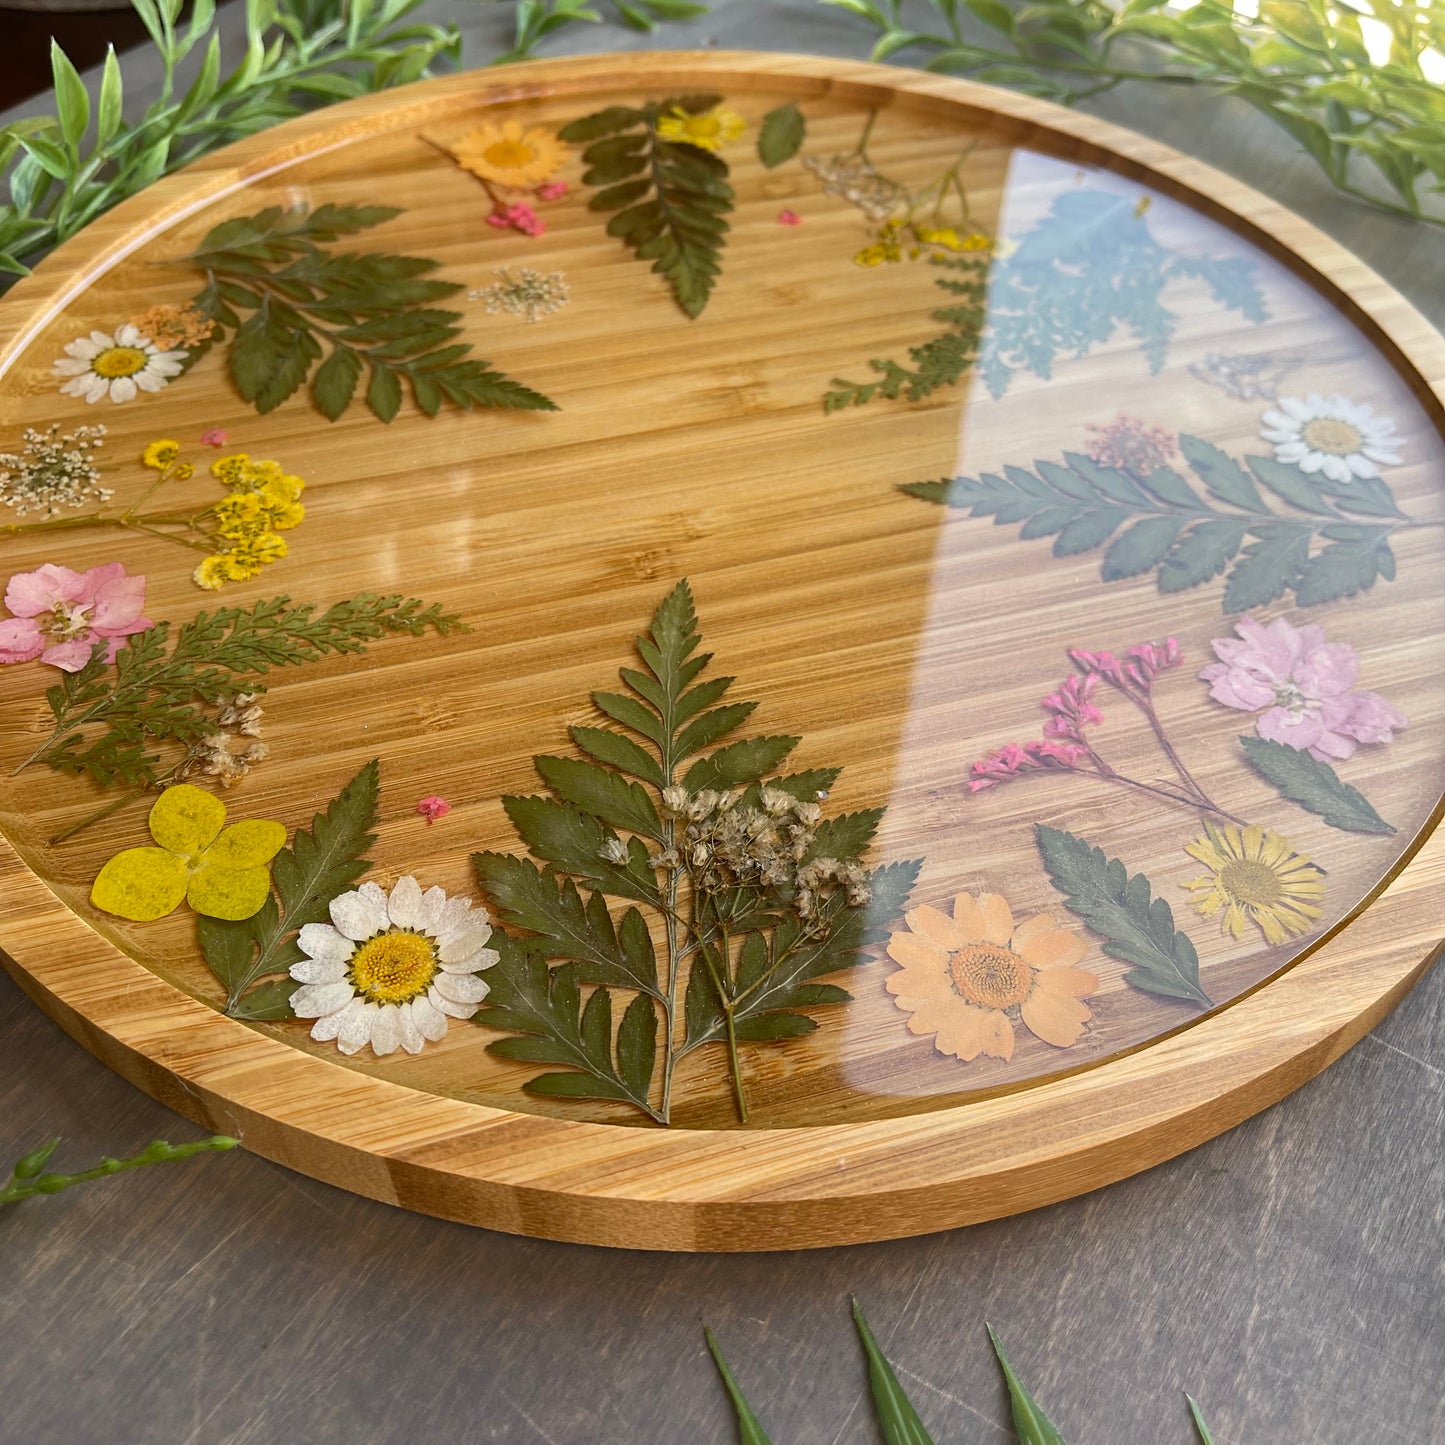 Resin Class - Flower Tray - 8/12 @ 1pm